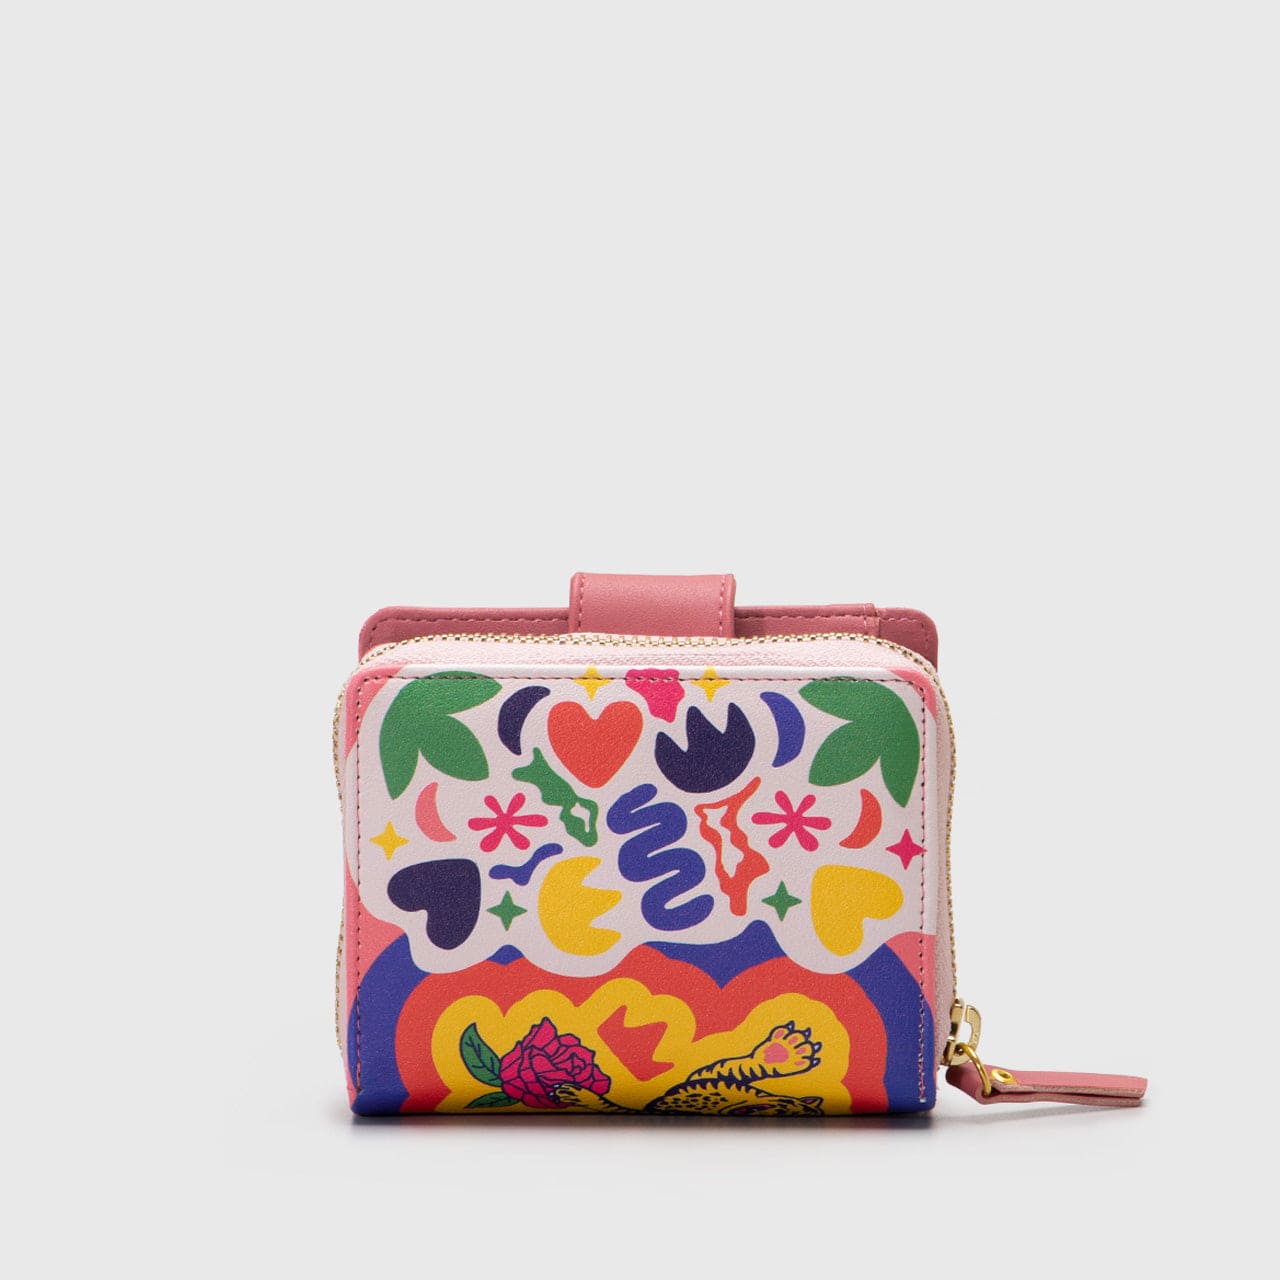 Adorable Projects Official Valois Wallet Peach - Dompet Wanita